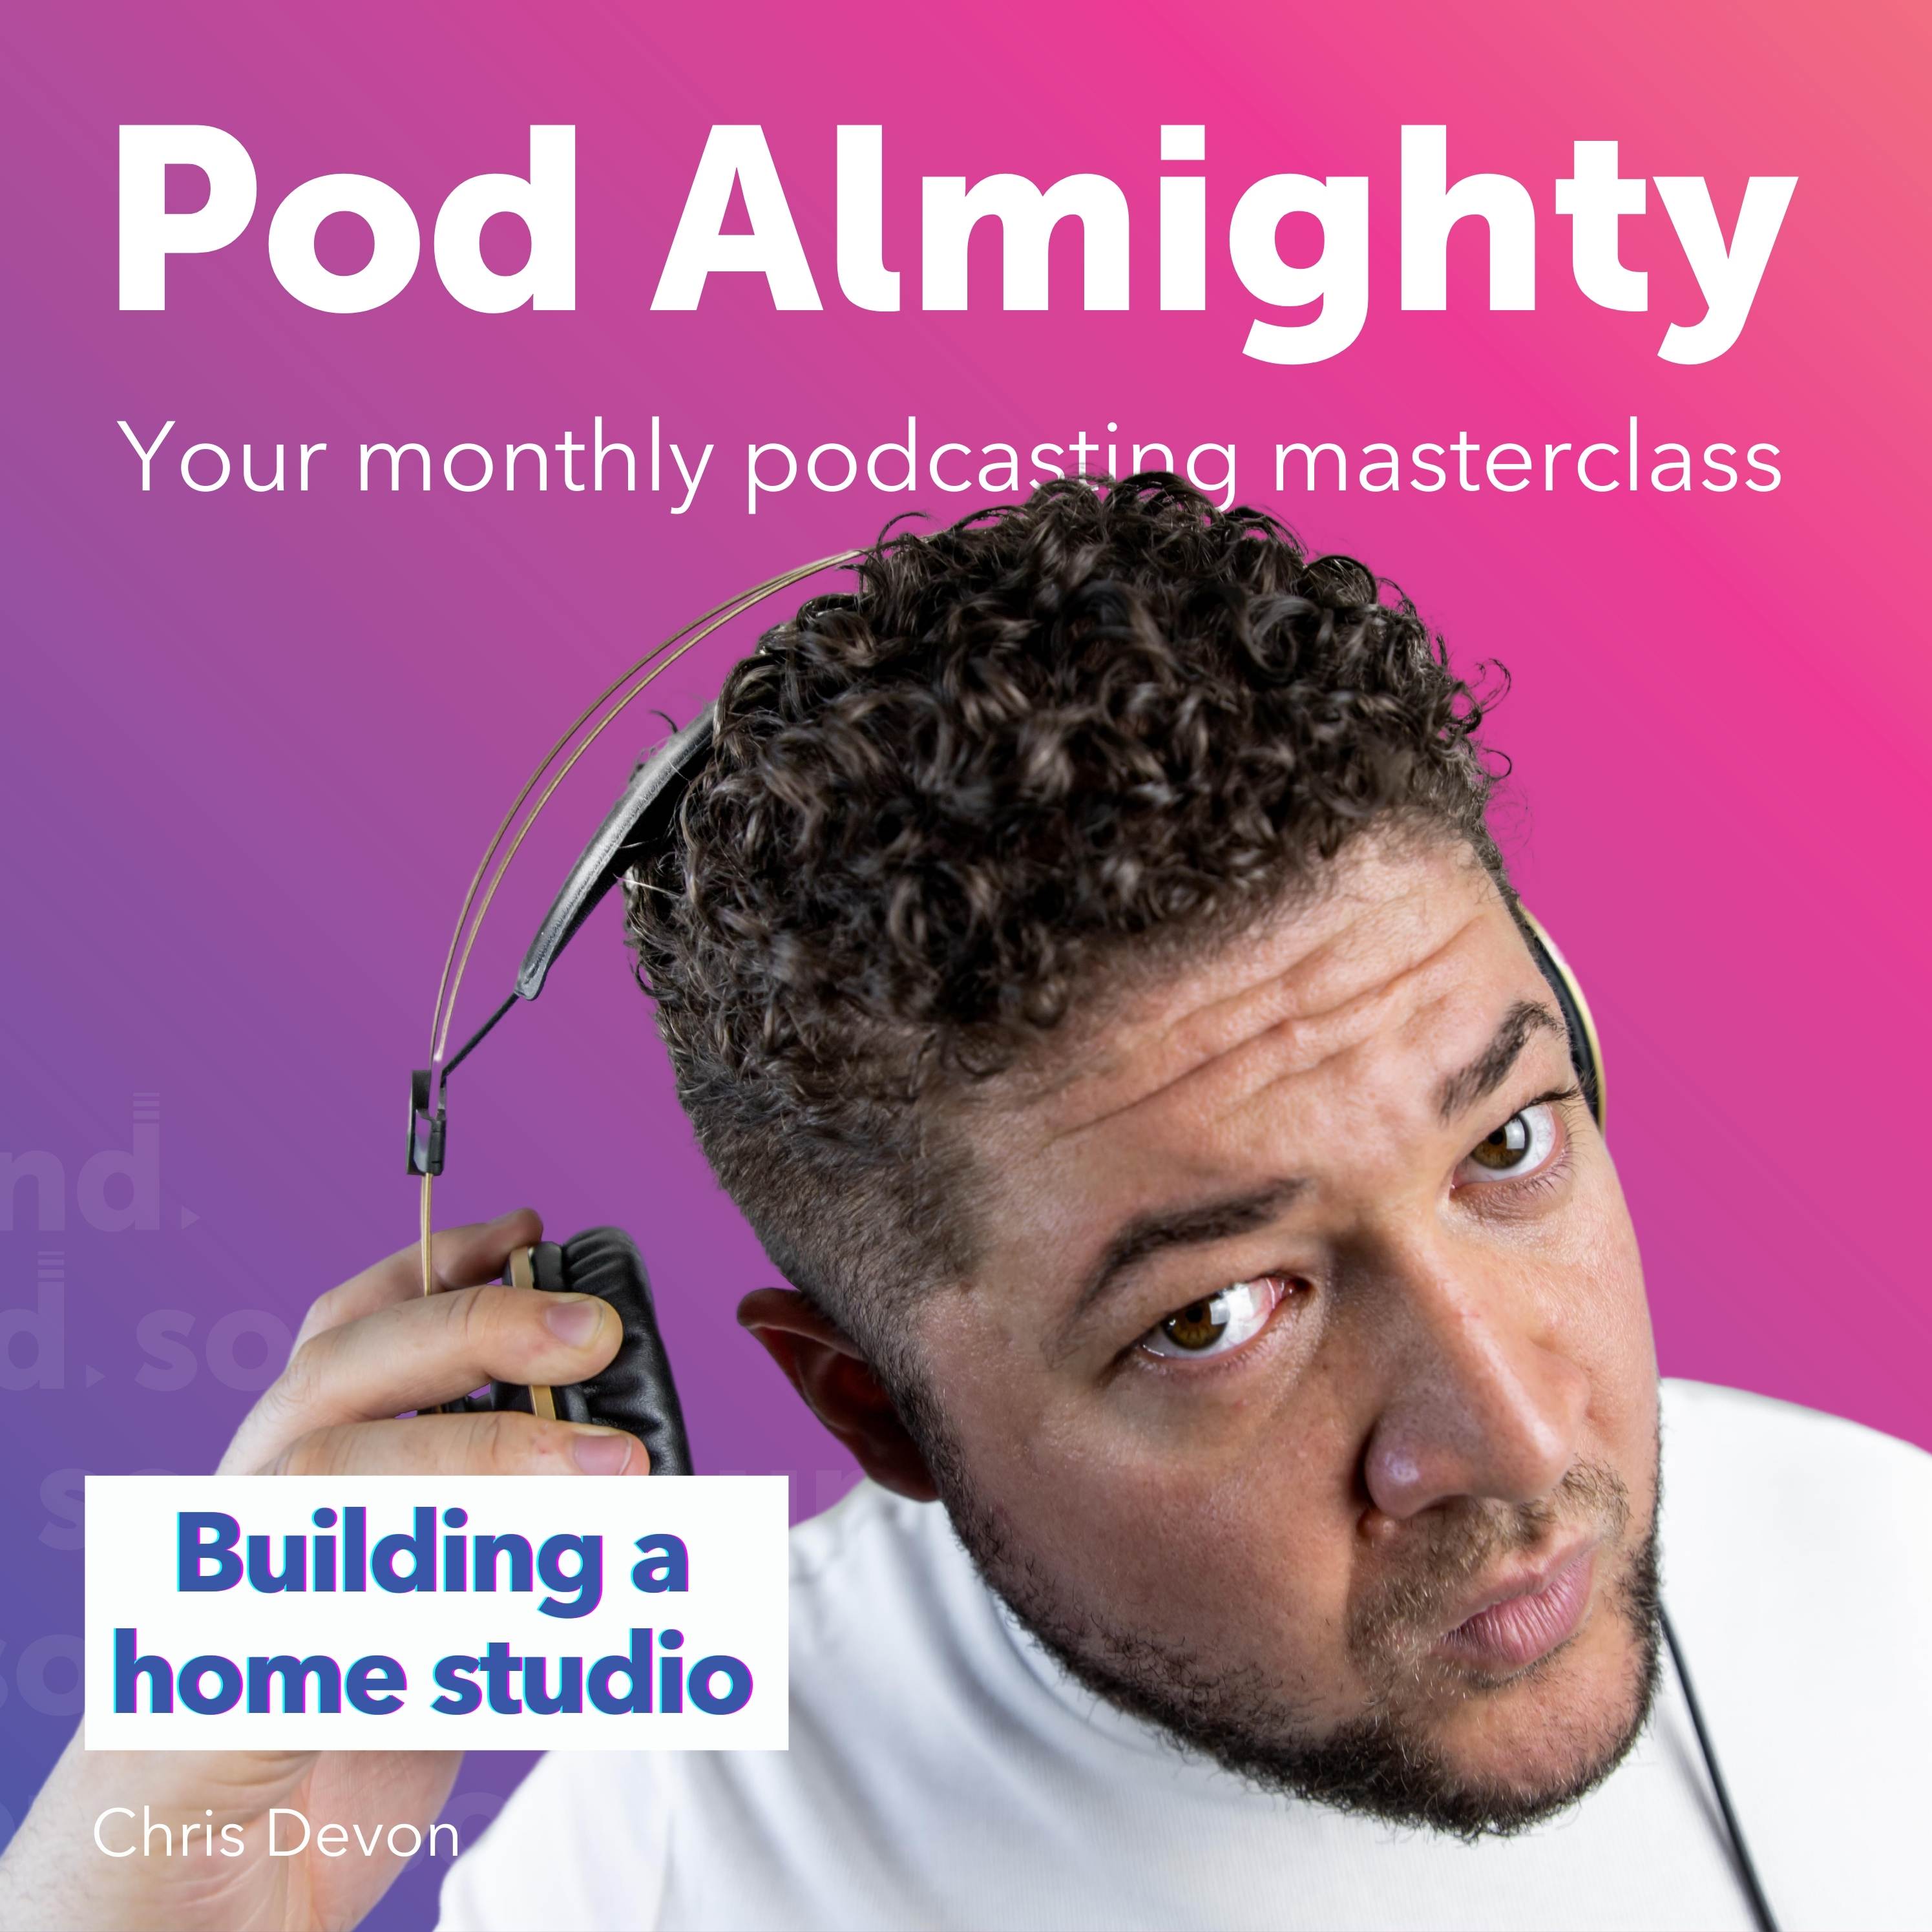 Artwork for podcast Pod Almighty